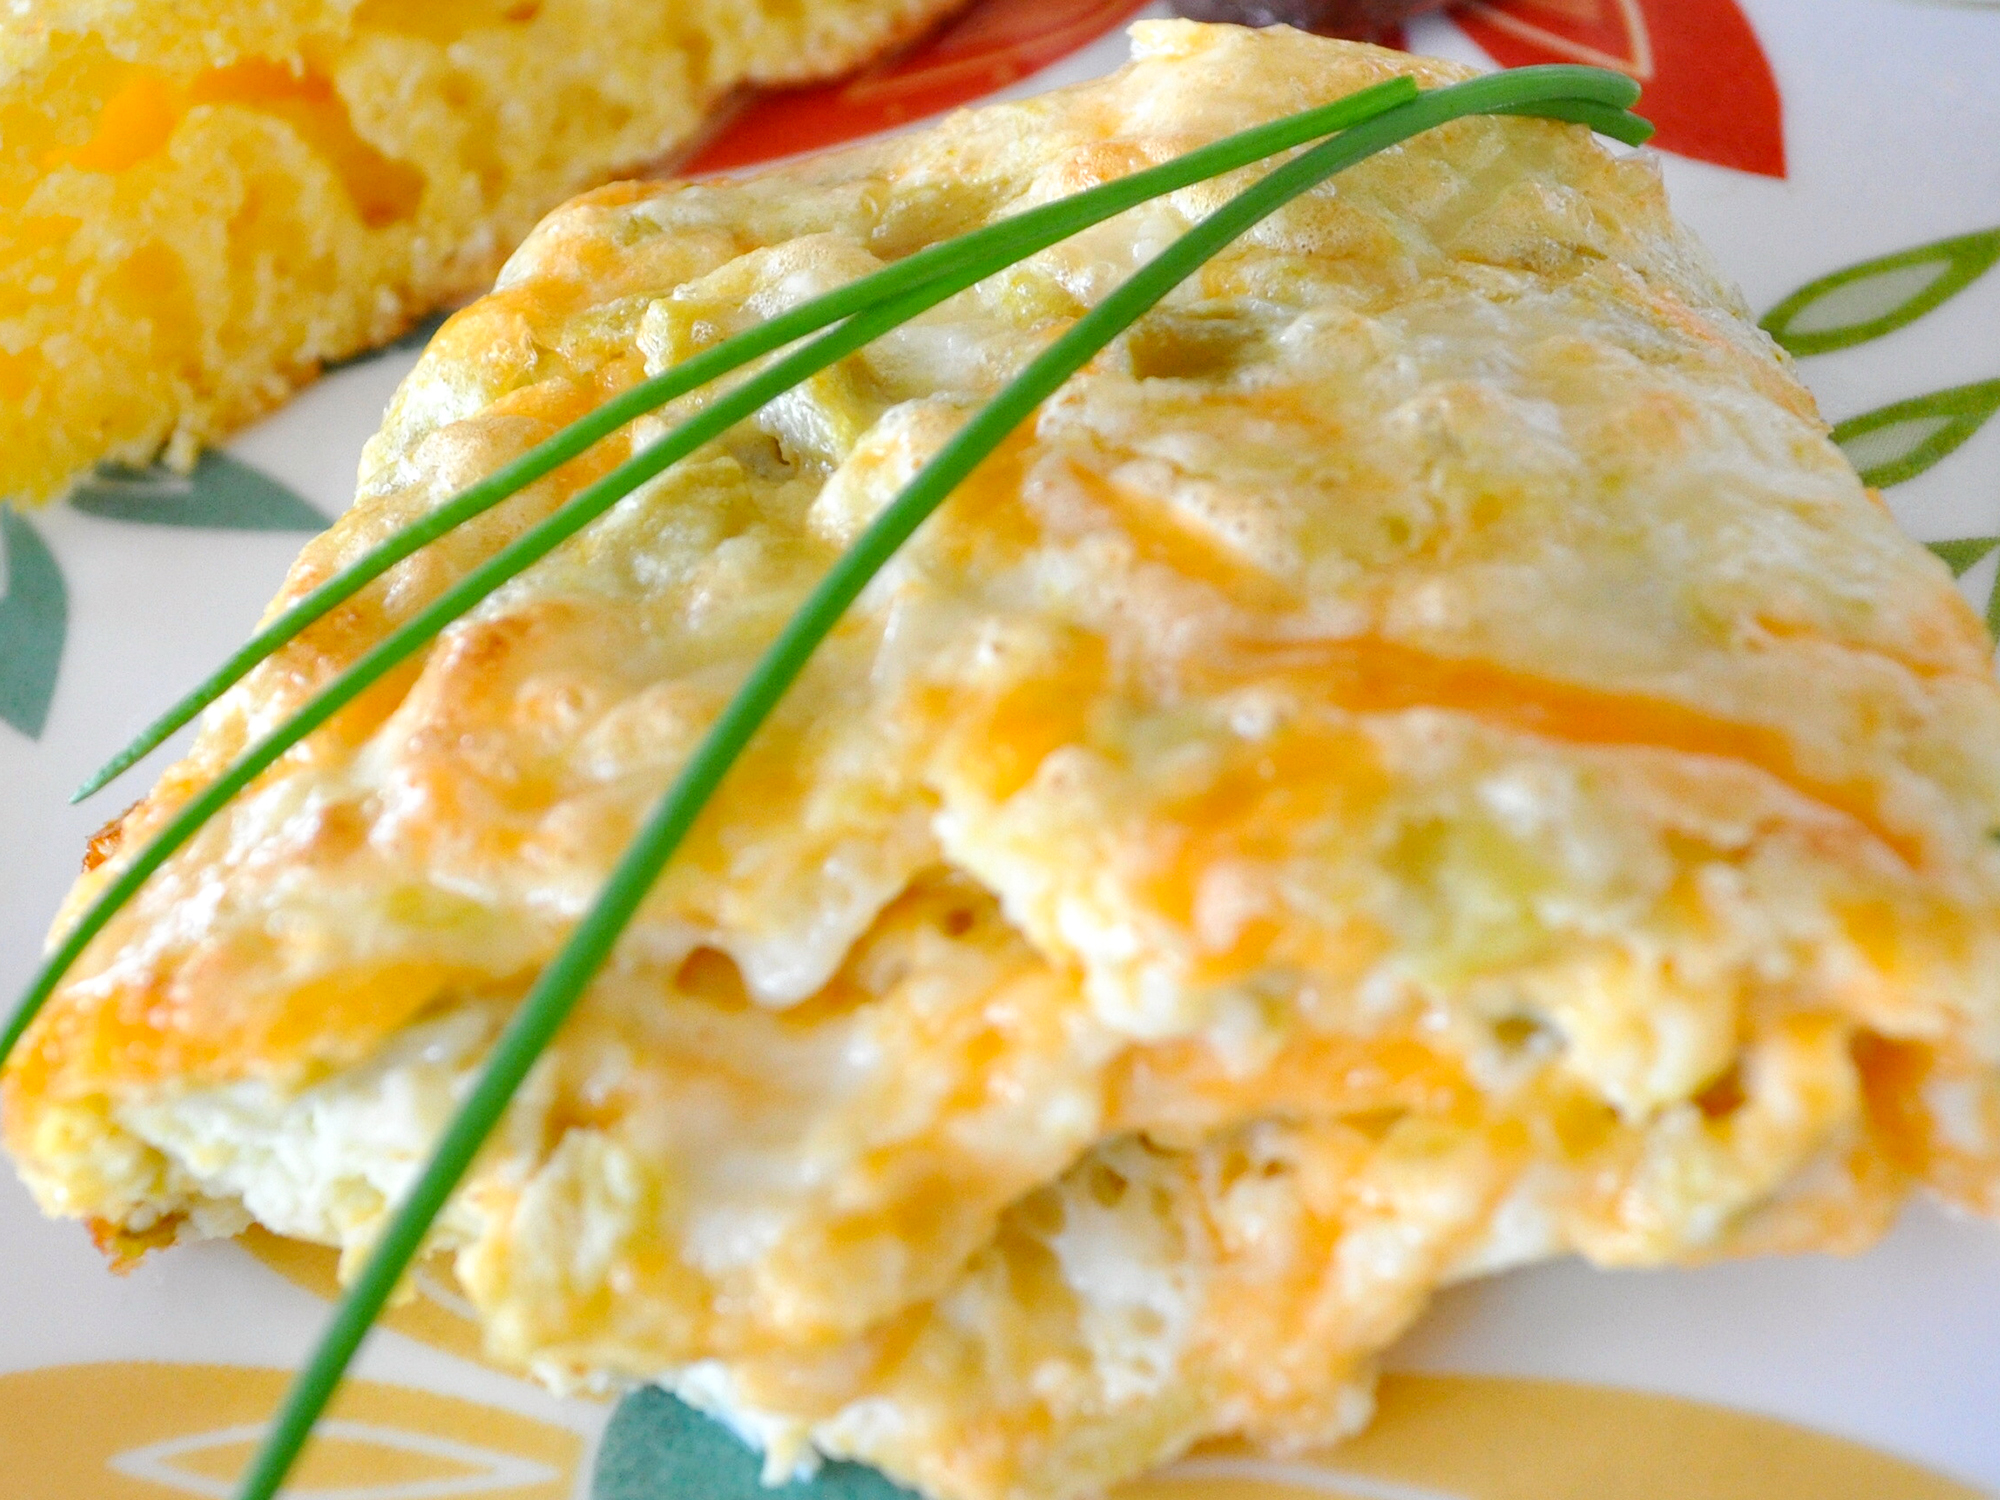 close up view of Green Chile Eggs with cheese, garnished with chives and served with toast on a colorful plate